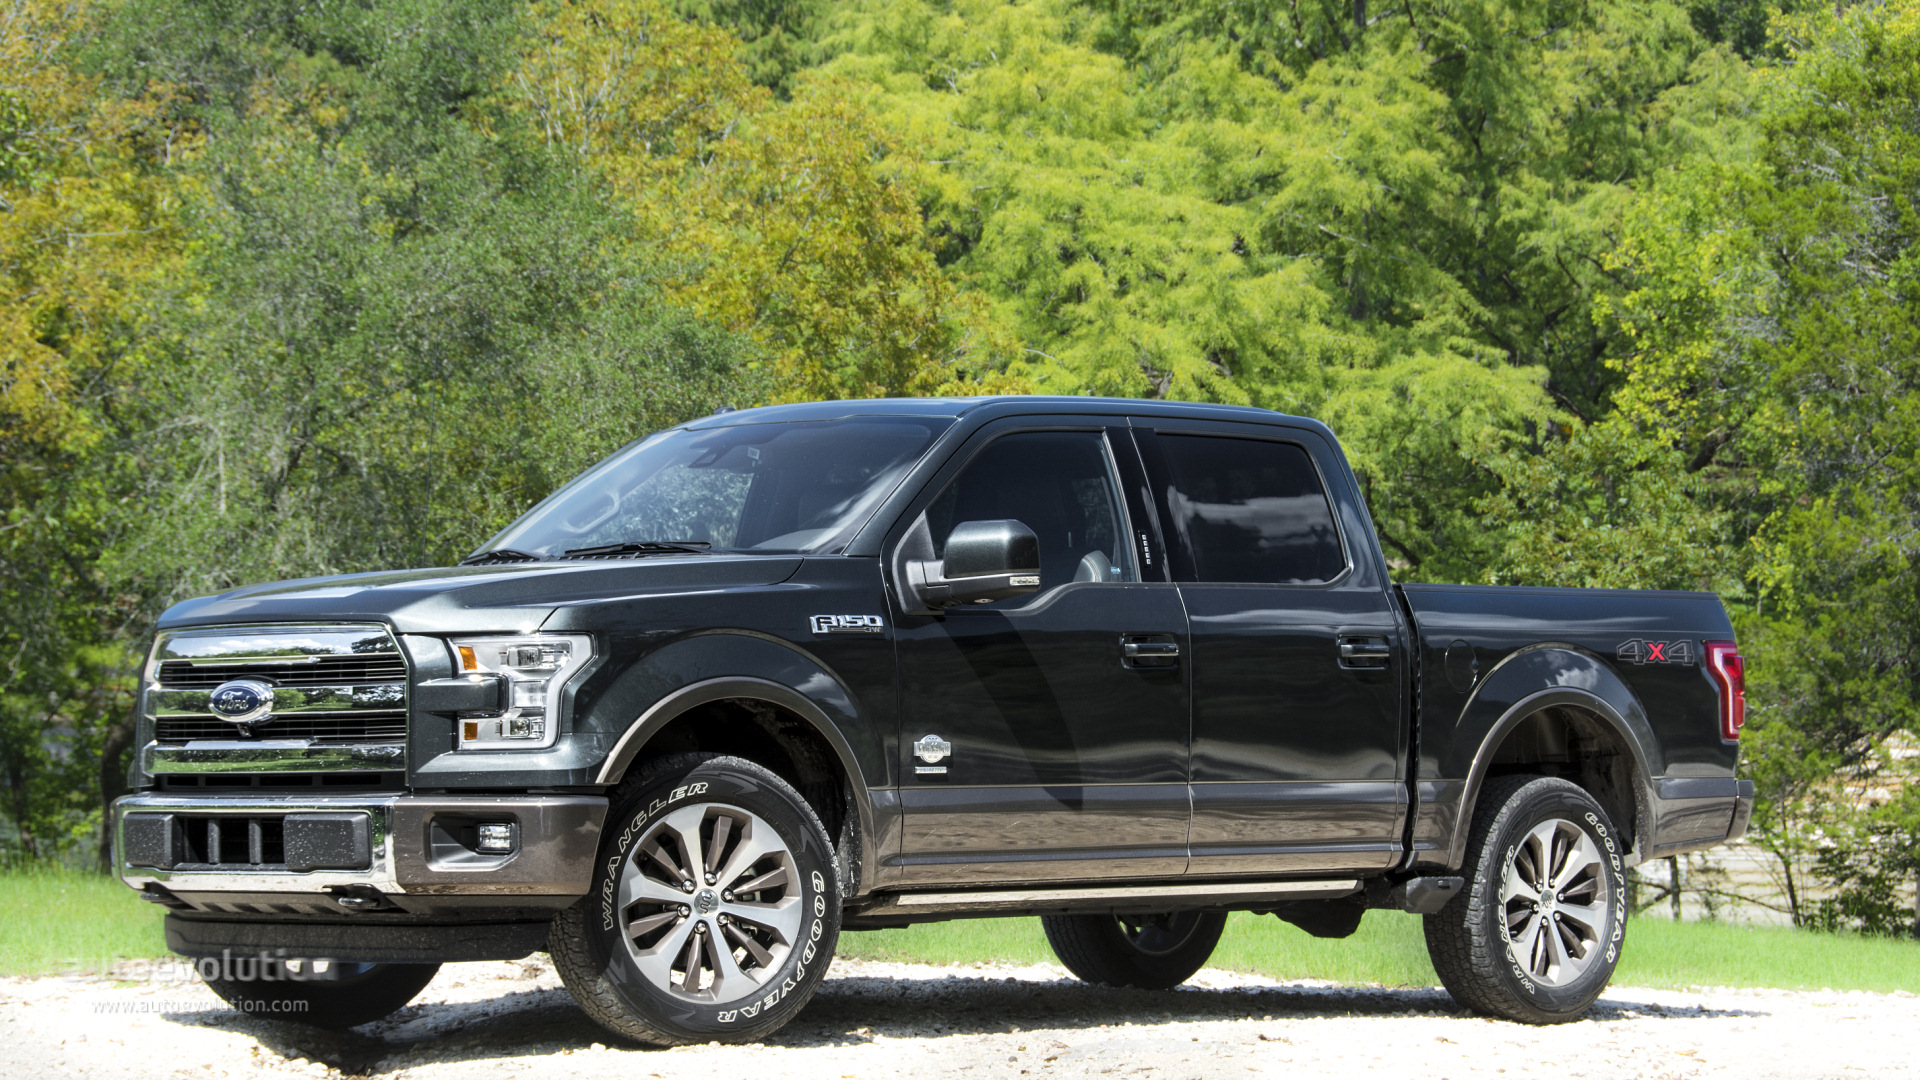 2015 Ford F-150 Backgrounds on Wallpapers Vista